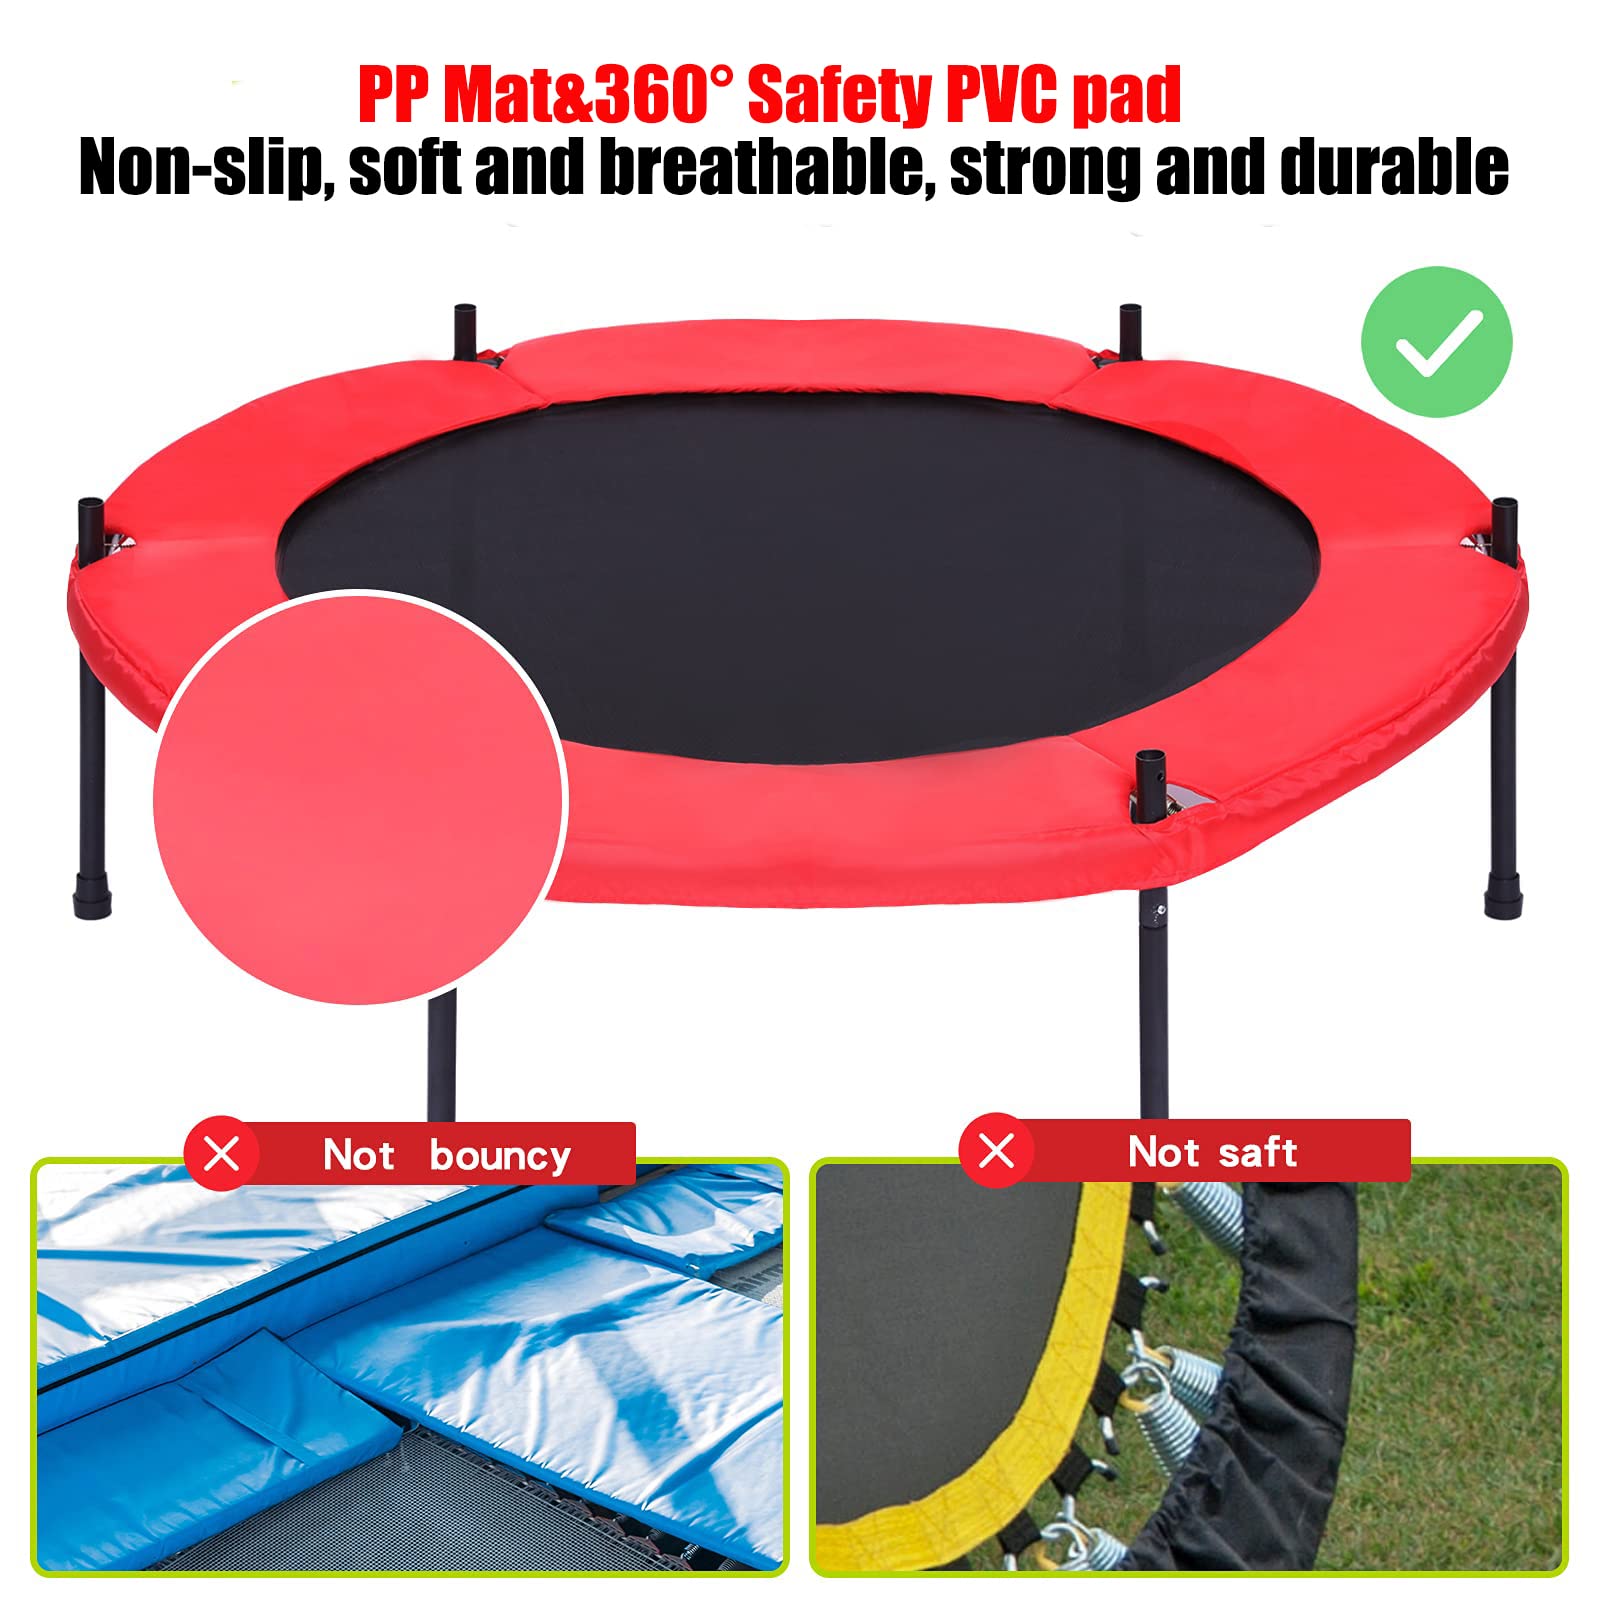 TOYMATE Kids Trampoline with Safety Enclosure Net - 5FT Trampoline for Toddlers Indoor and Outdoor - Parent-Child Interactive Game Fitness Trampoline Toy Gift for Boys and Girls Age 1-8